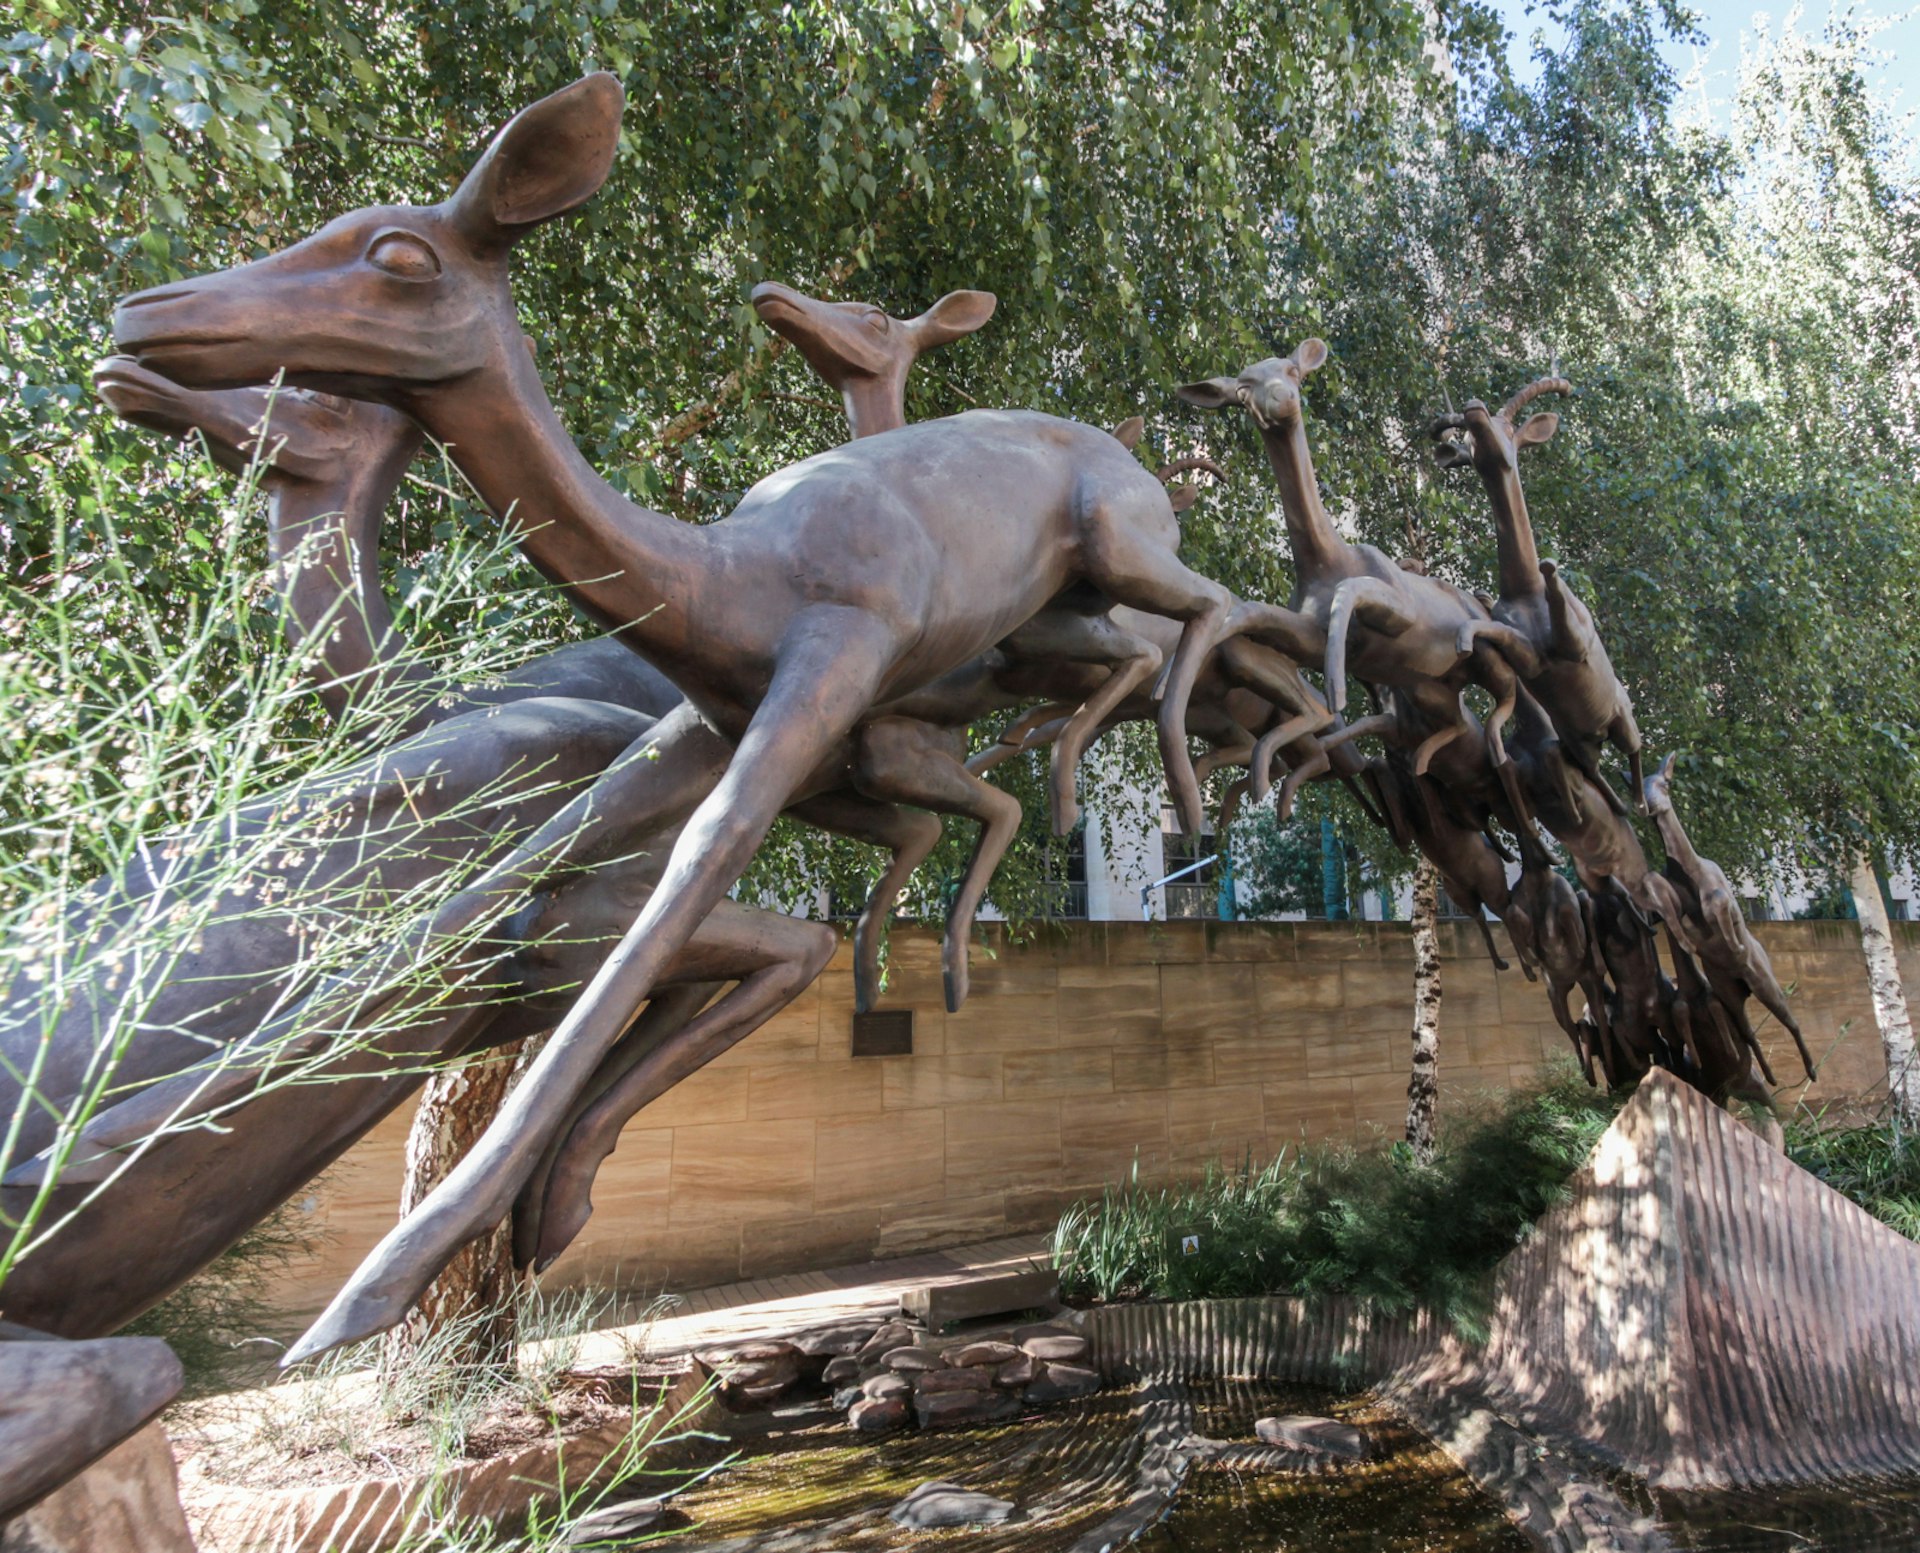 A large bronze statue of leaping impalas, one behind the other. With those at the back leaping, those in the middle flying in the air, and those at the front in the act of landing, the statue forms a large arch © Heather Mason / Lonely Planet